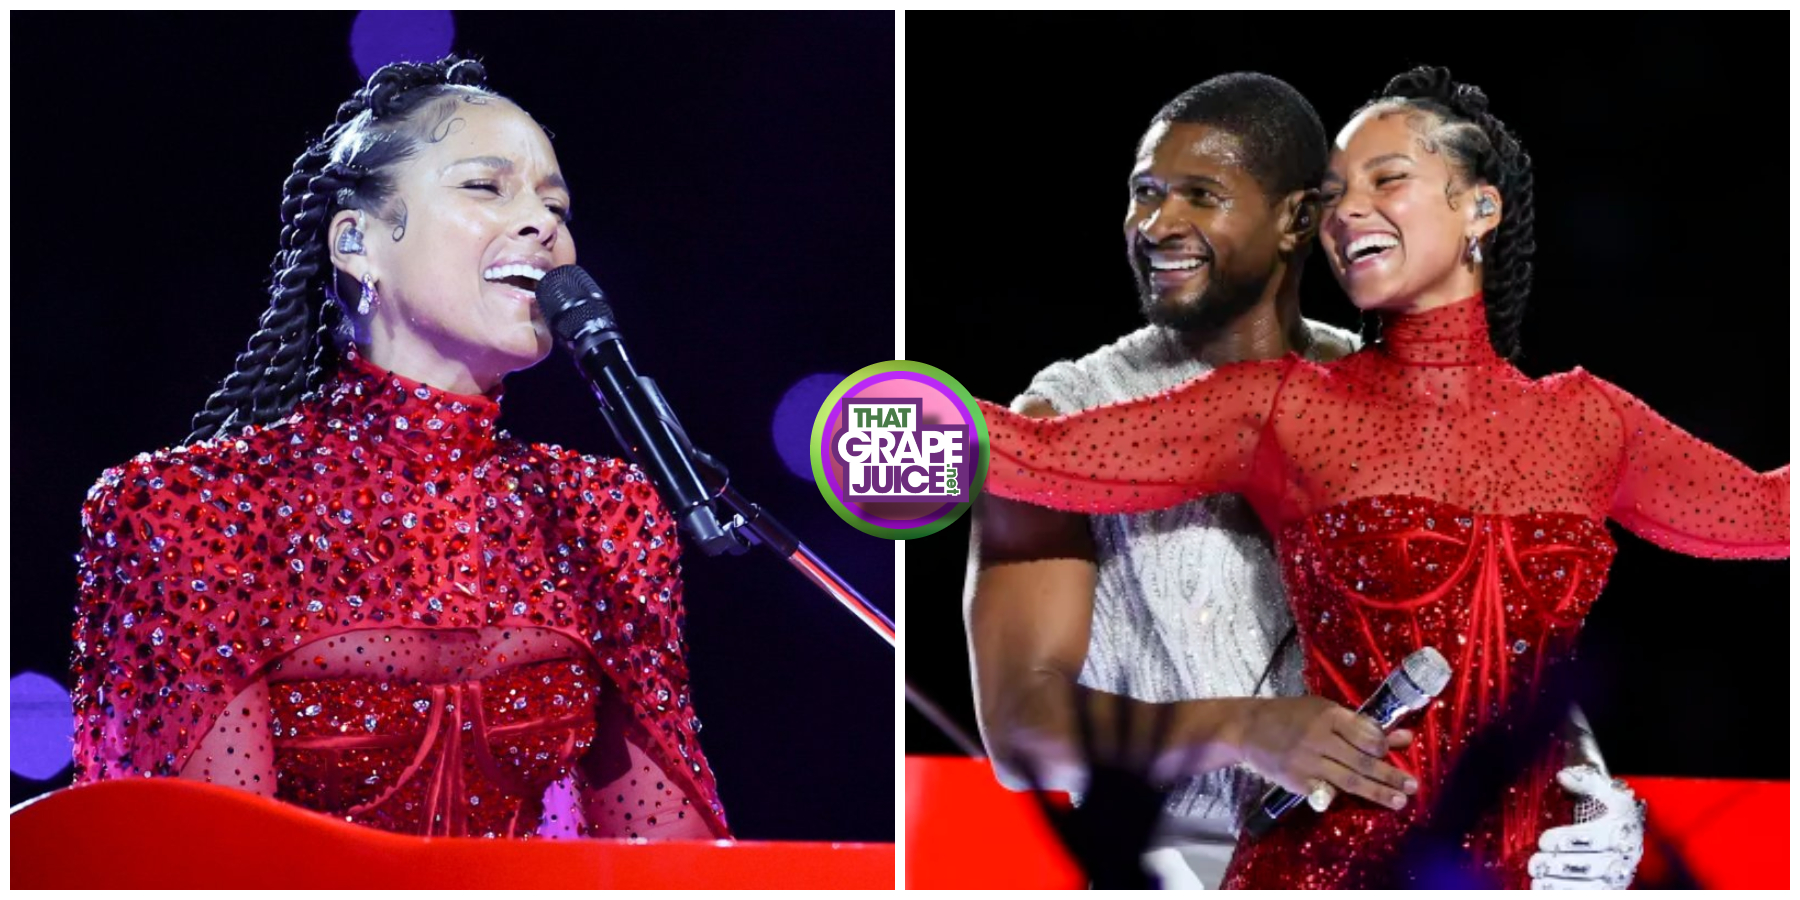 Alicia Keys Goes Behind the Scenes of Usher Super Bowl Halftime Show / Suggests Heavy Cape Caused Her “Infamous” Voice Crack [Watch]